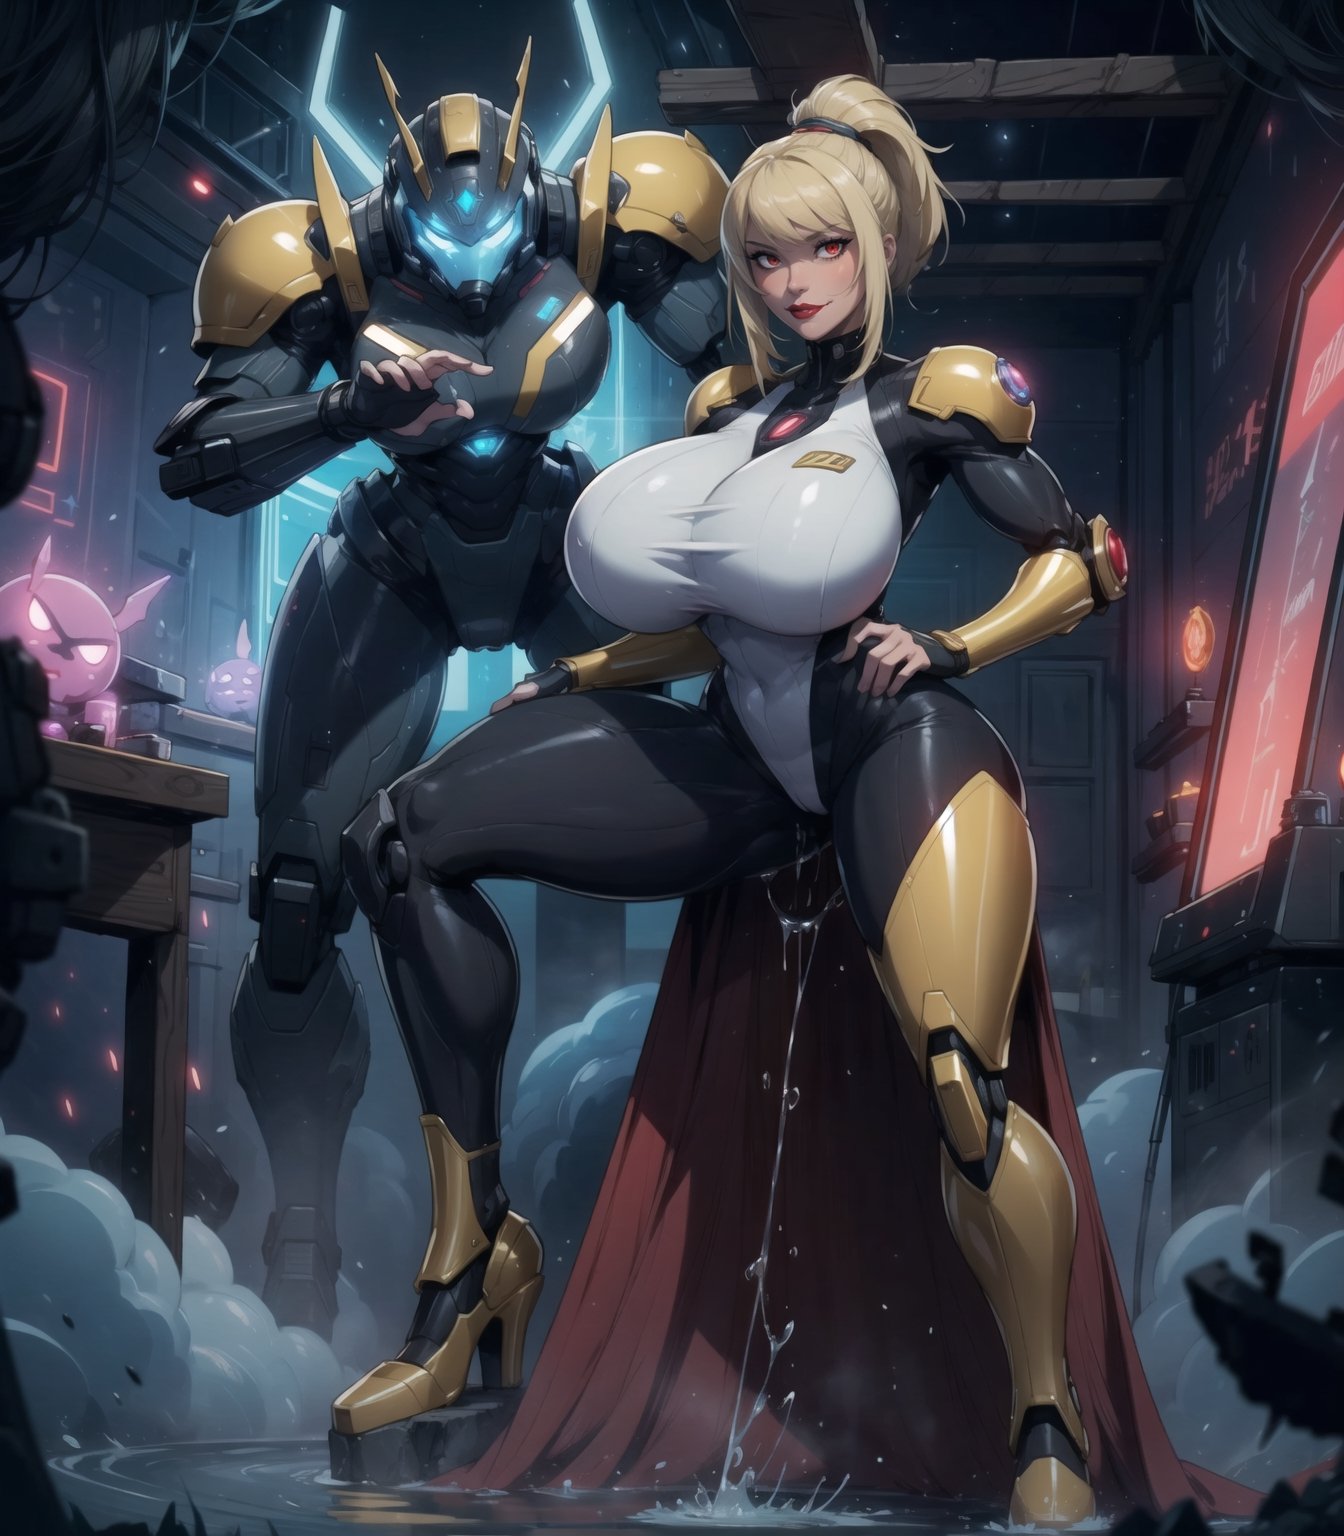 Masterpiece in maximum 16K resolution, inspired by the Super Metroid and Mecha styles, creating an epic and technological fusion. | In a futuristic and alien scene, the fearless 22-year-old woman, Samus Aran, shines wearing an imposing all-white mecha suit, with red parts and adorned with golden neon lights. Her long blonde hair, tied in a ponytail, adds a dynamic touch to the look, while her red_eyes stare directly at the viewer, conveying unwavering determination. | The Alien Dungeon reveals itself as a maze of wonders and dangers, with ancient structures that tell stories of past civilizations, mysterious altars that add a magical touch, and complex machines and advanced computers suggesting technologies beyond human understanding. Destroyed robots indicate epic battles fought in the past, leaving a trail of legends and challenges. | Pipes drip acidic liquid, creating a dangerous and unpredictable atmosphere, while an acid pond adds an element of risk to the environment, challenging any intruder. | The scene is composed with a engaging angle, highlighting Samus Aran in the center of the action, ready to explore and face the challenges of this Alien Dungeon. Cinematic lighting accentuates the details of the mecha suit, with its golden neon lights and red parts, creating a vibrant contrast with the alien environment. | The warrior woman embodies the fusion of the epic and the technological, representing courage in the face of the unknown. | {The camera is positioned very close to her, revealing her entire body as she adopts a sensual_pose, interacting with and leaning on a structure in the scene in an exciting way} | She is adopting a ((sensual_pose as interacts, boldly leaning on a structure, leaning back in an exciting way):1.3), ((perfect_pose)), ((perfect_pose):1.5), (((full body))), ((perfect_fingers, better_hands, hands, perfect_hands, perfect_legs)), ((perfect_fingers, perfect_hands, perfect_legs):0.7), gigantic_breasts, More_Detail